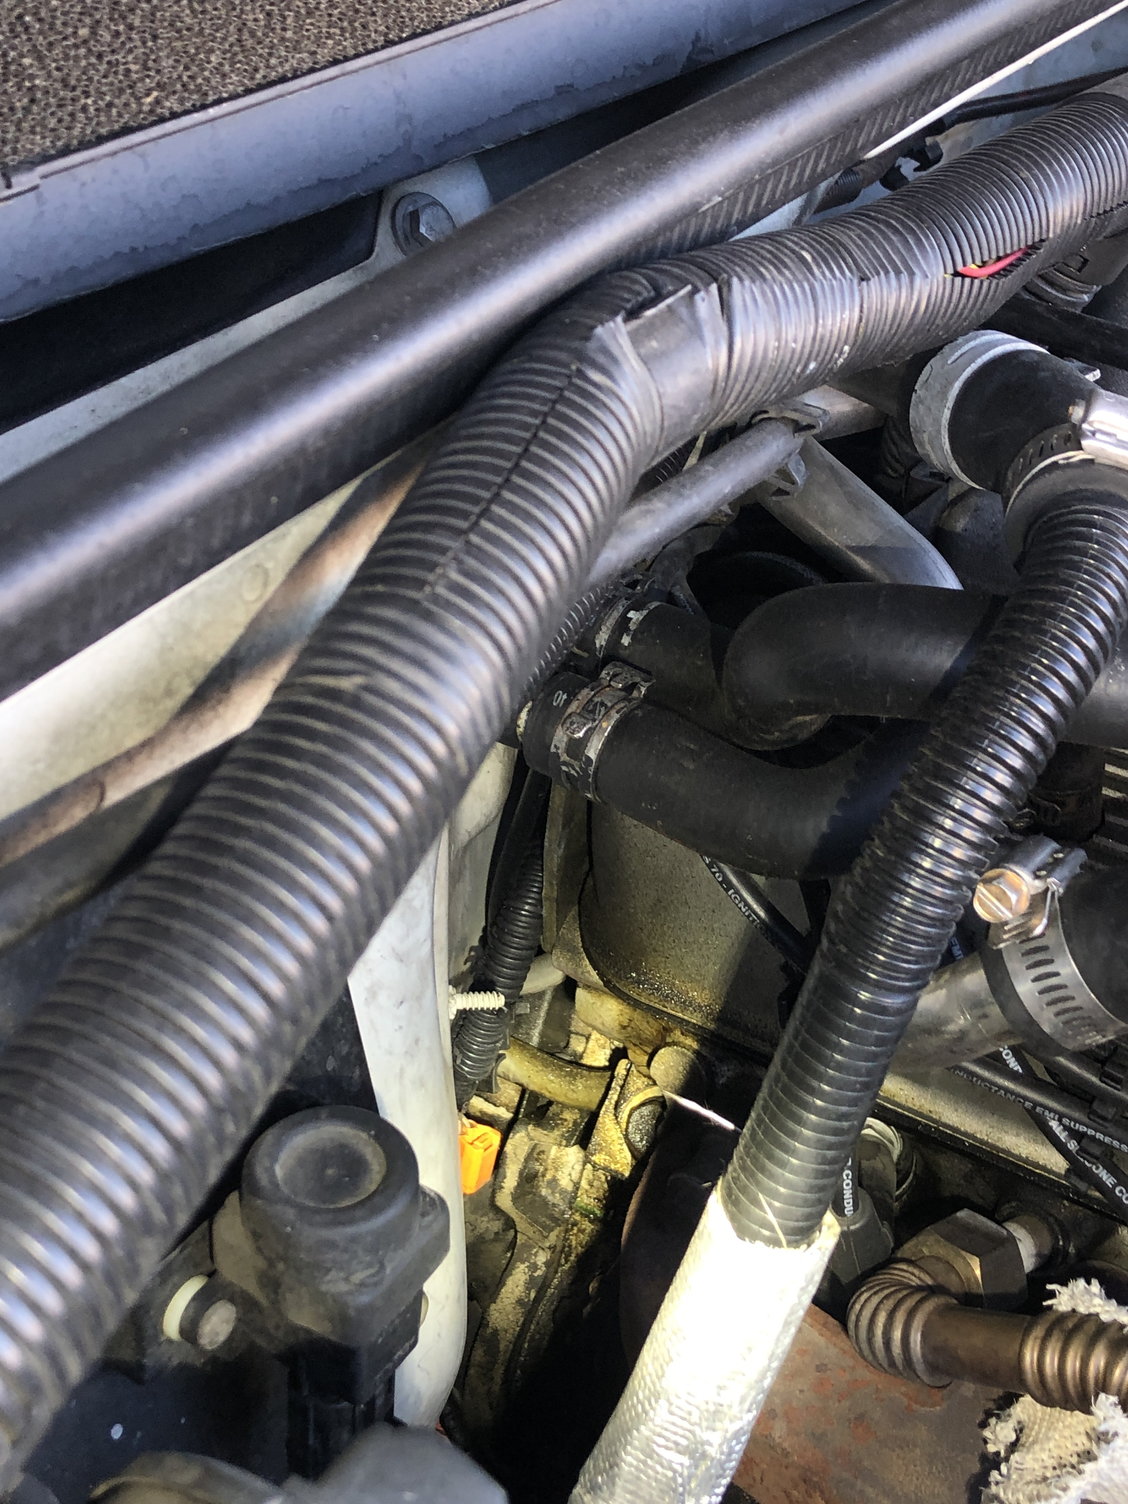 How to Recognize and Locate an Antifreeze Leak